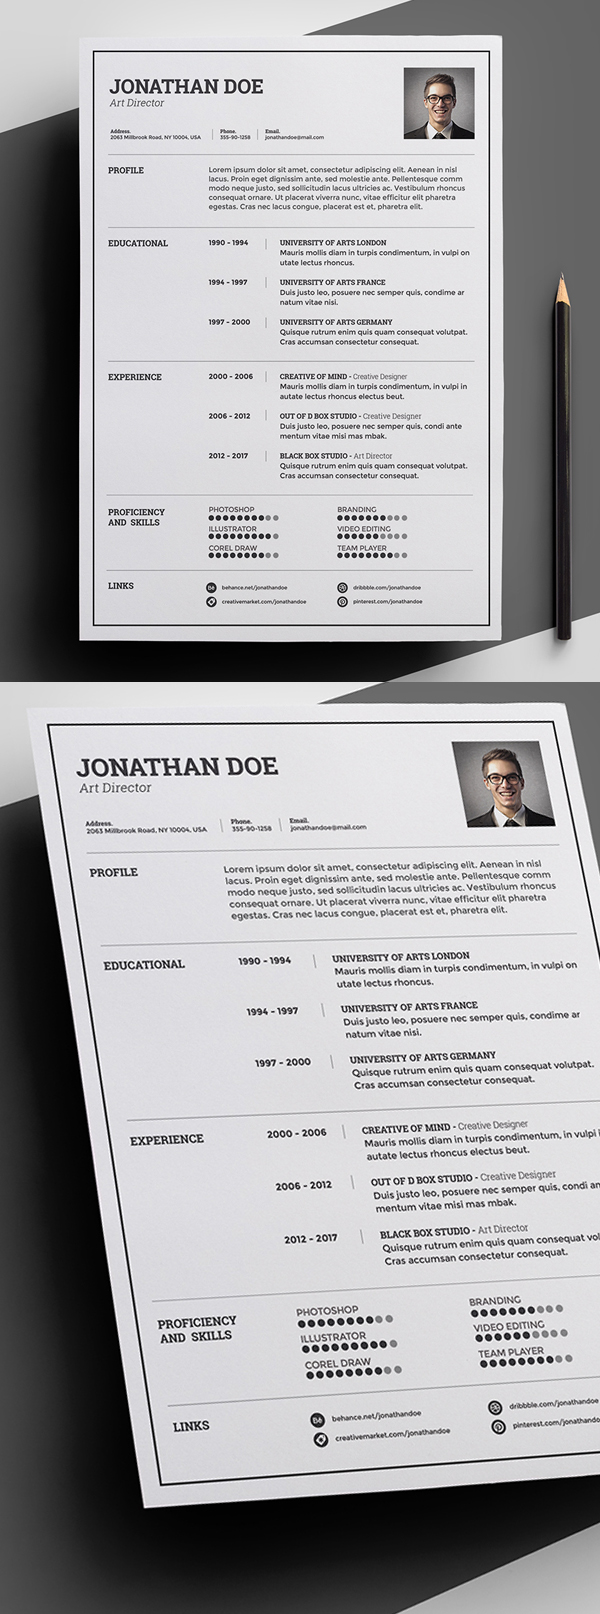 50 Free Resume Templates: Best Of 2018 -  12